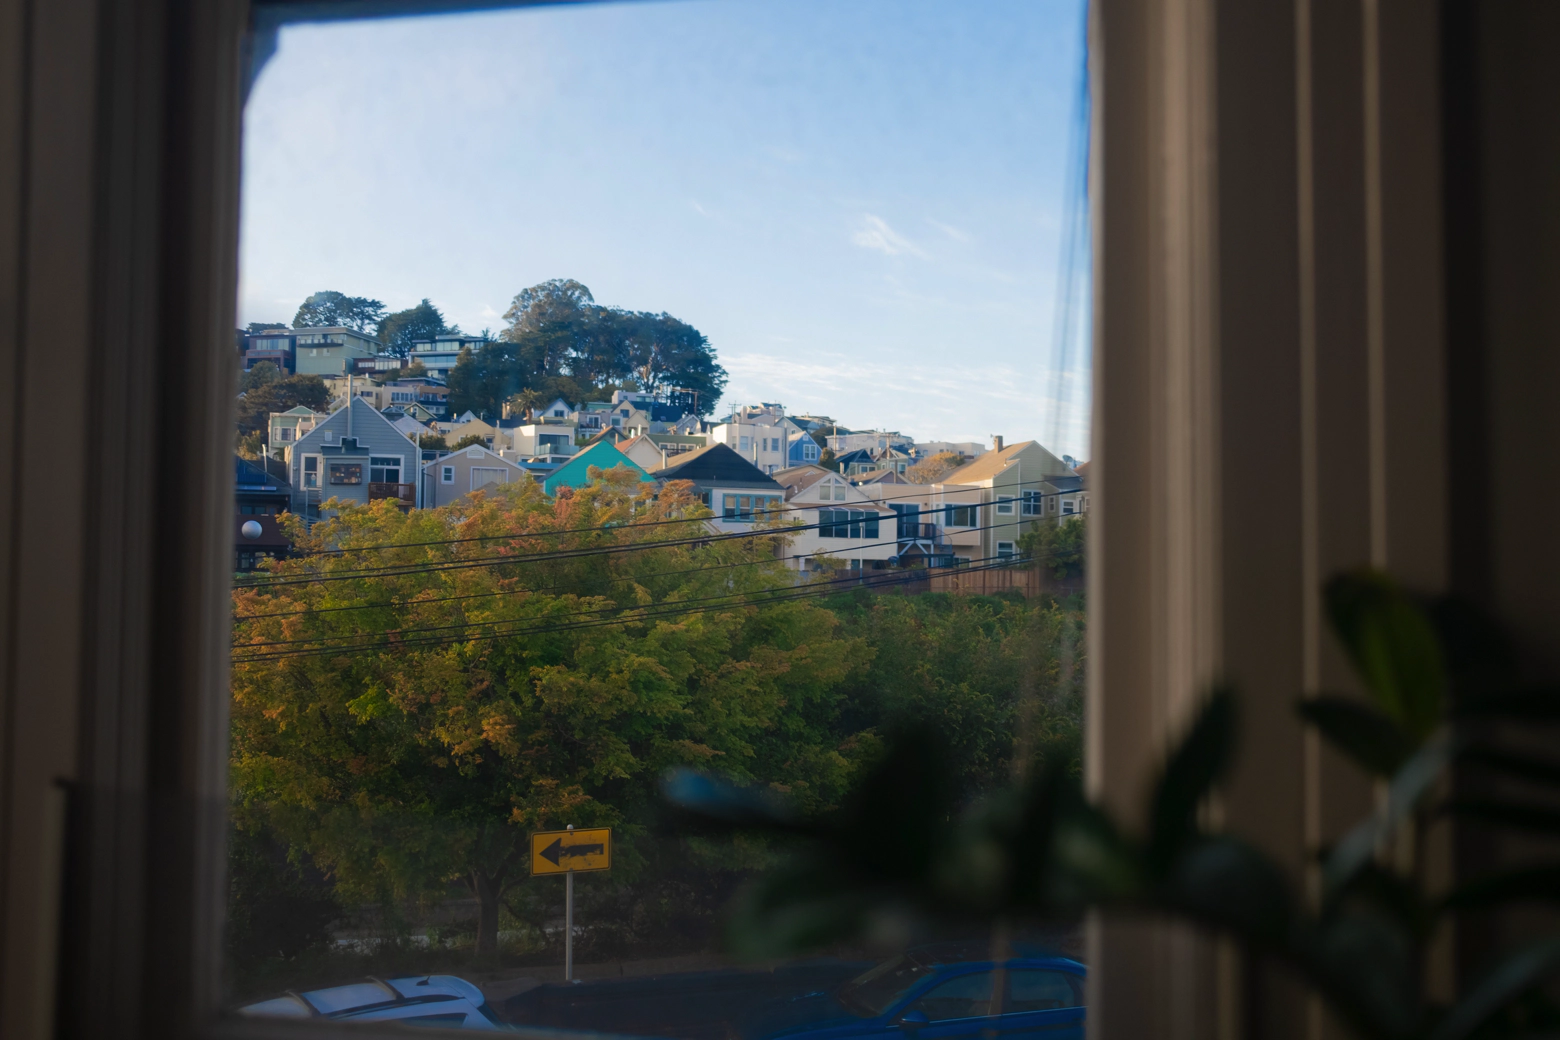 From a window, a string of houses huddle on a hillside. Trees. A yellow road sign pointing to the left.